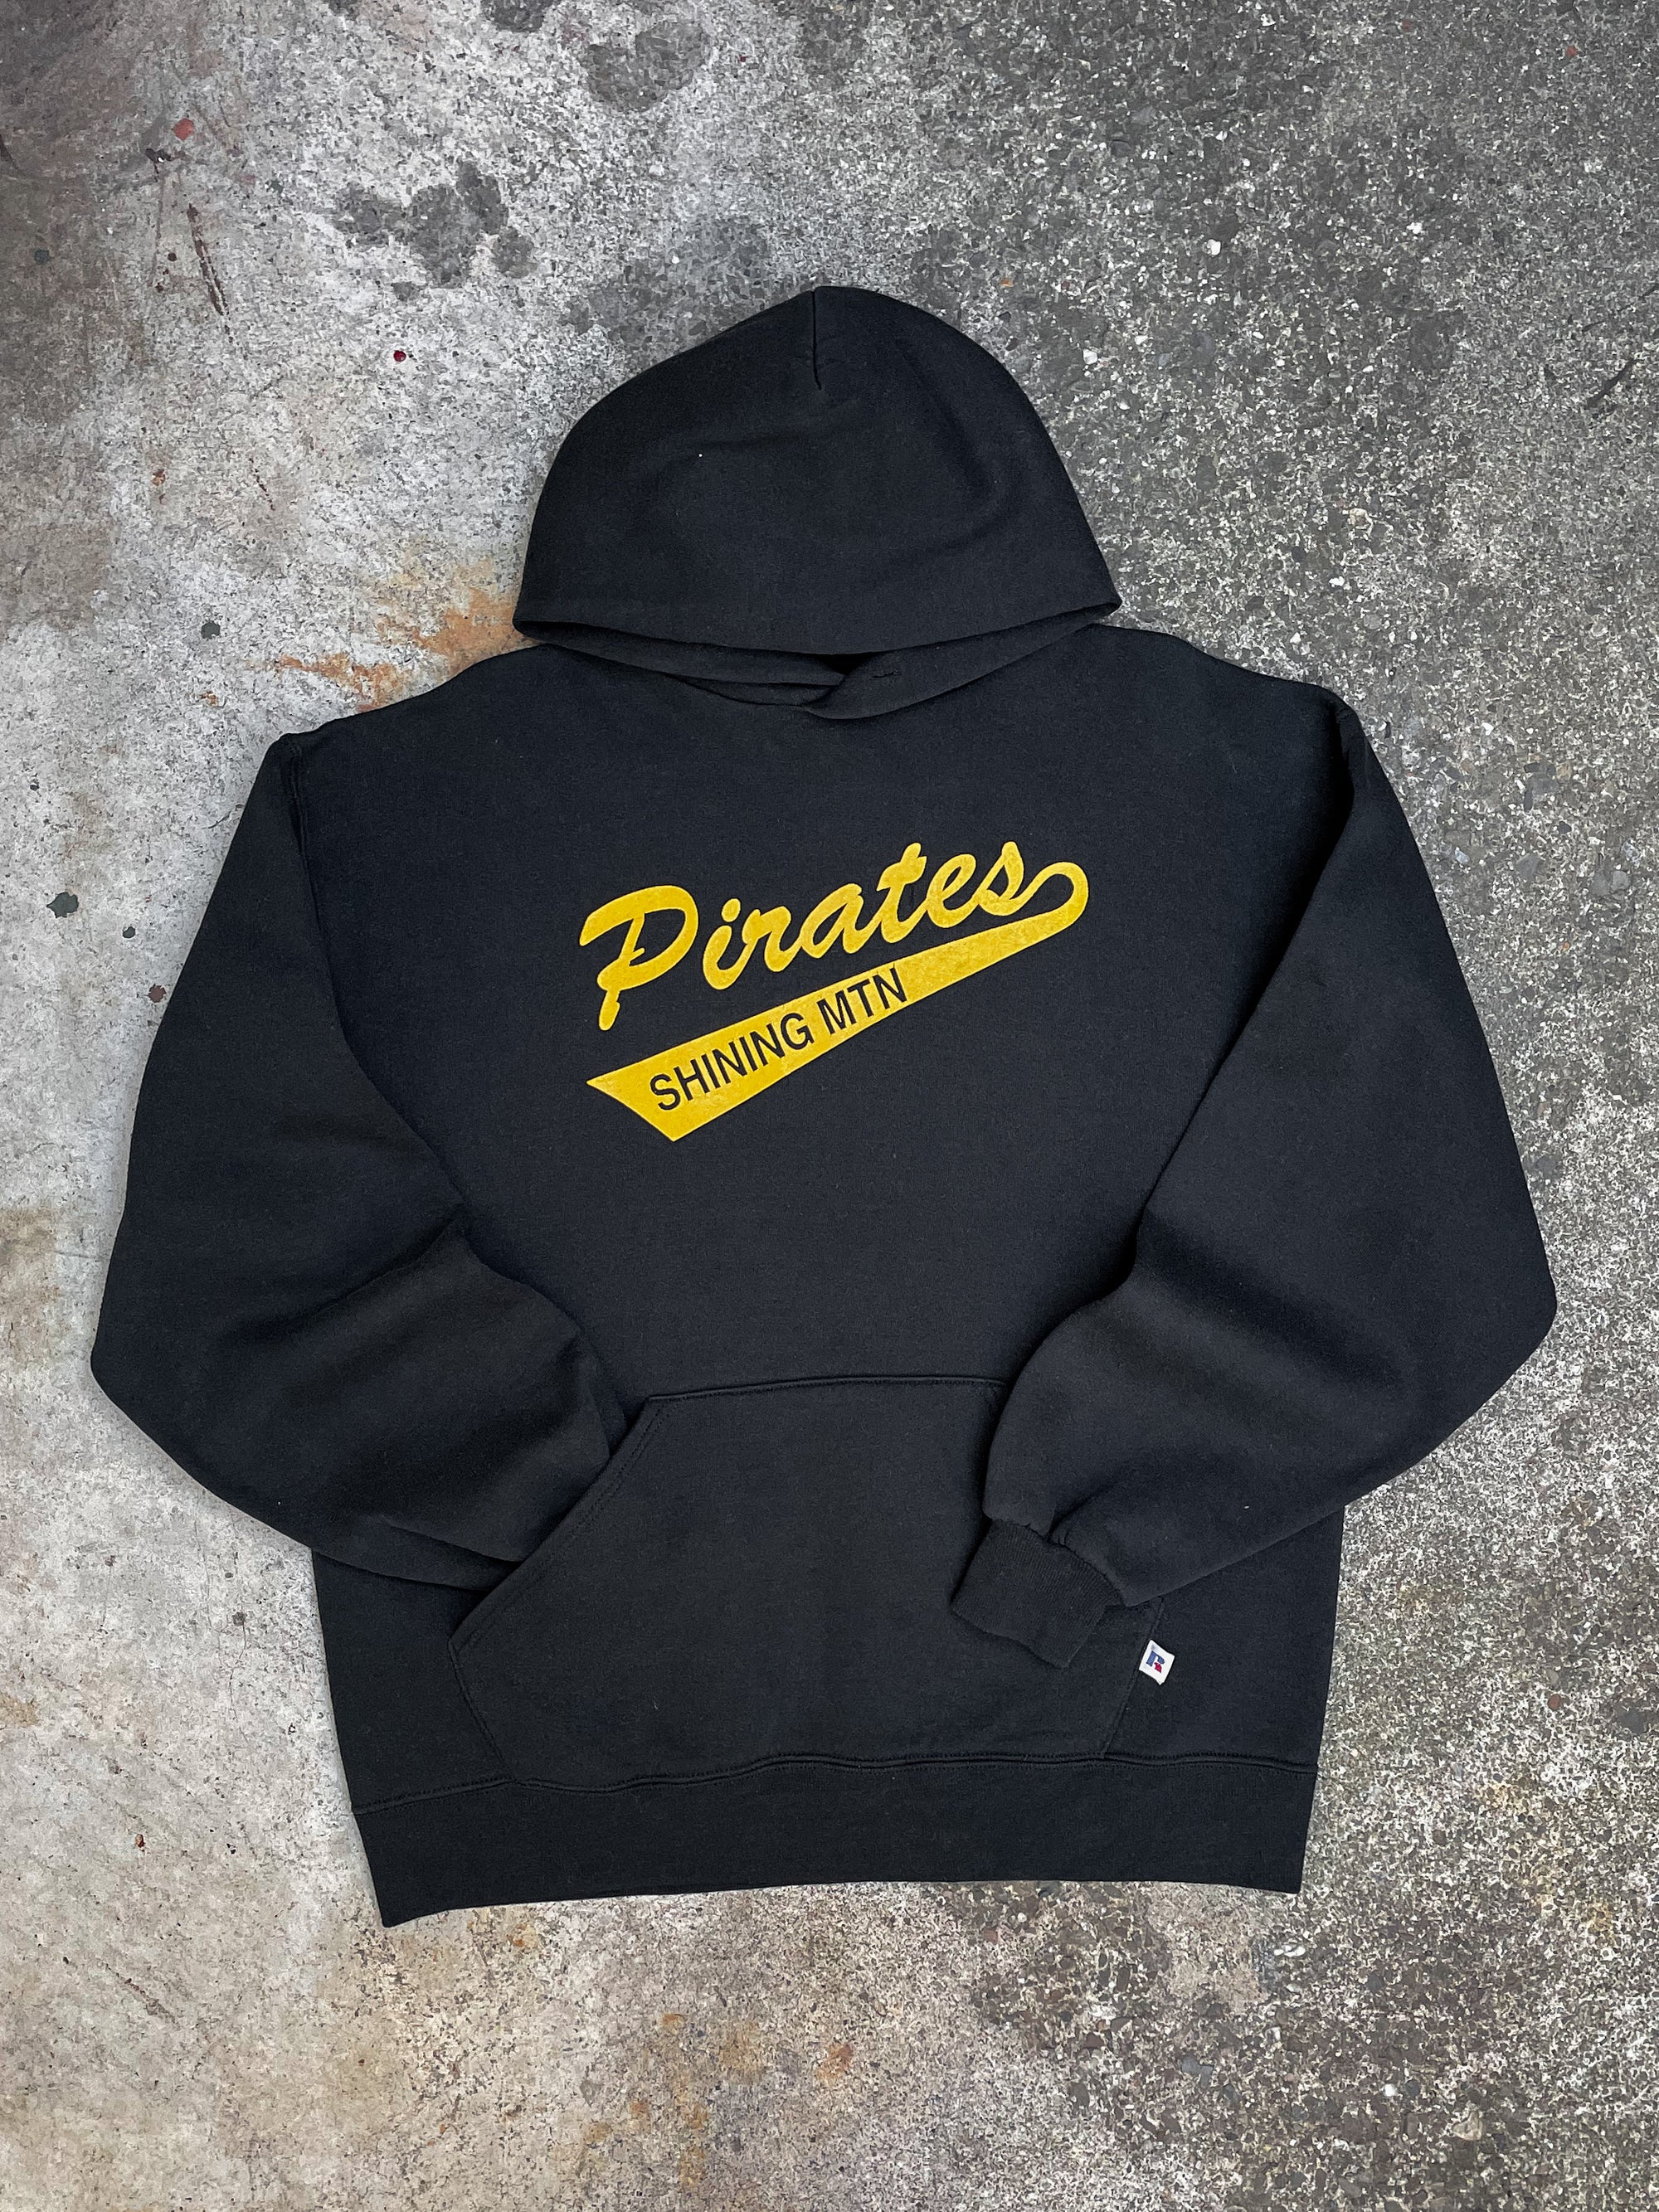 1990s Russell “Pirates” Hoodie (L)